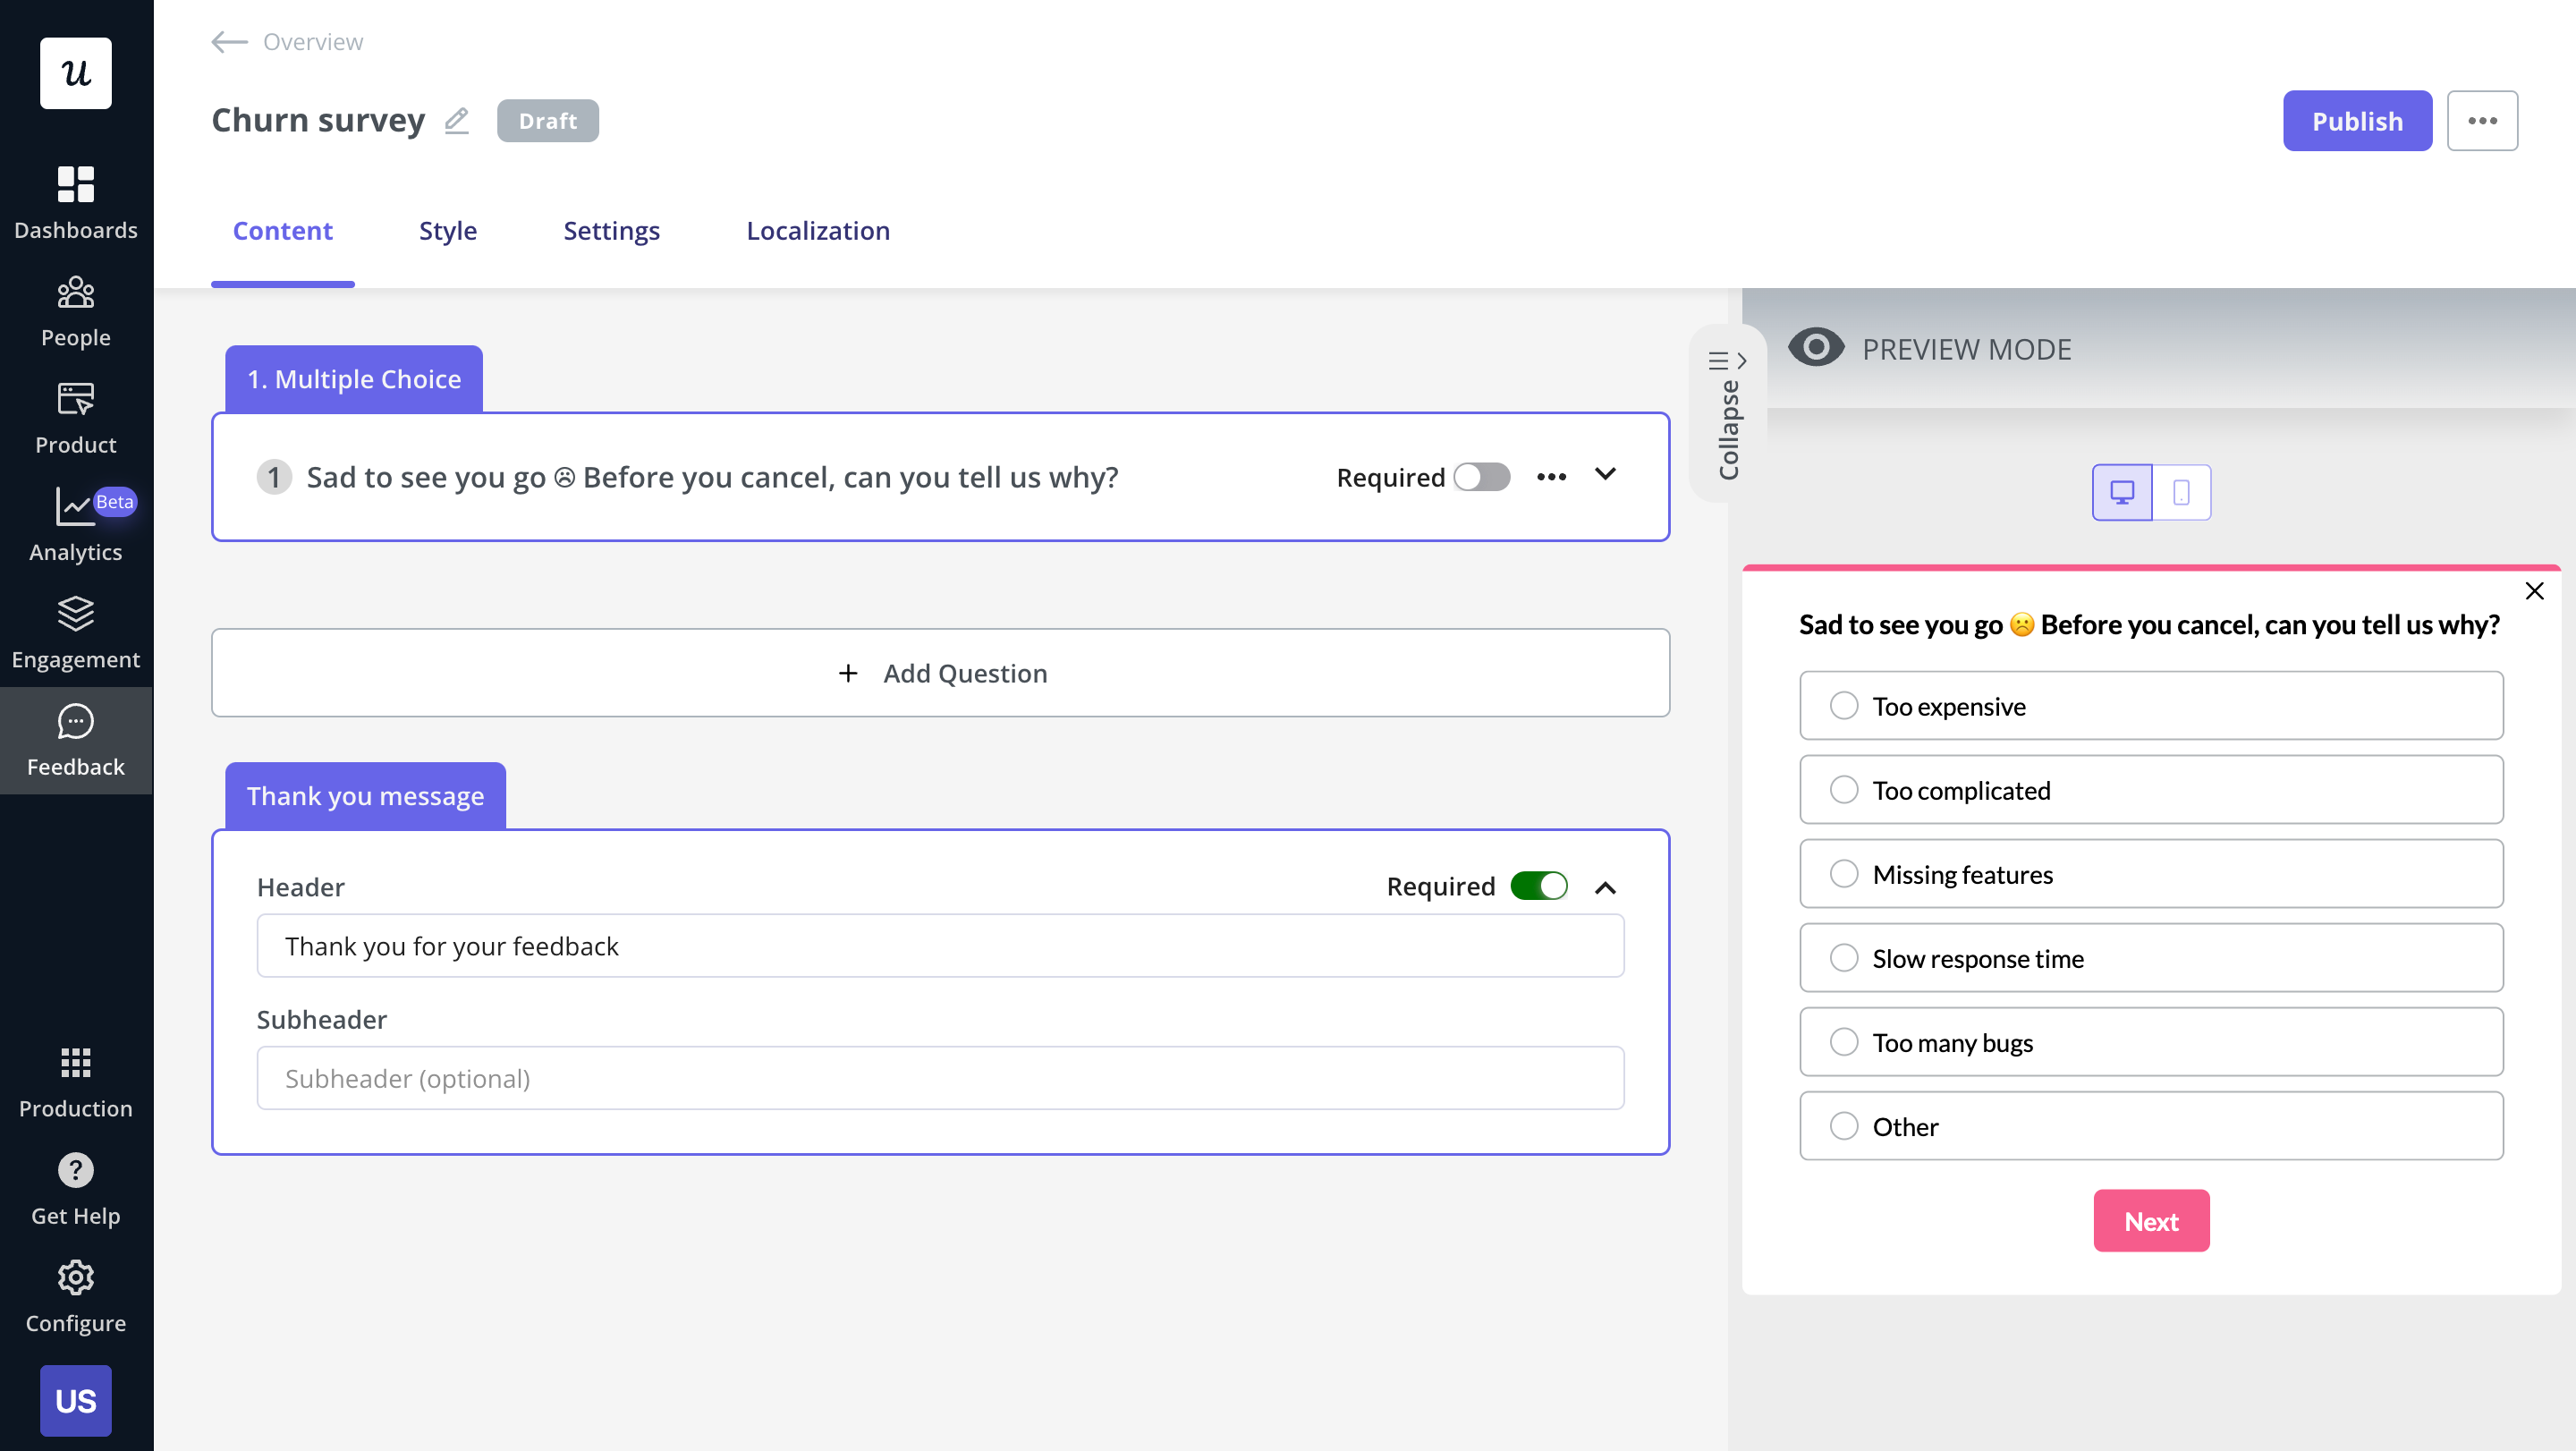 Want to build in-app churn surveys with no-code? Get a Userpilot demo and get started right away!